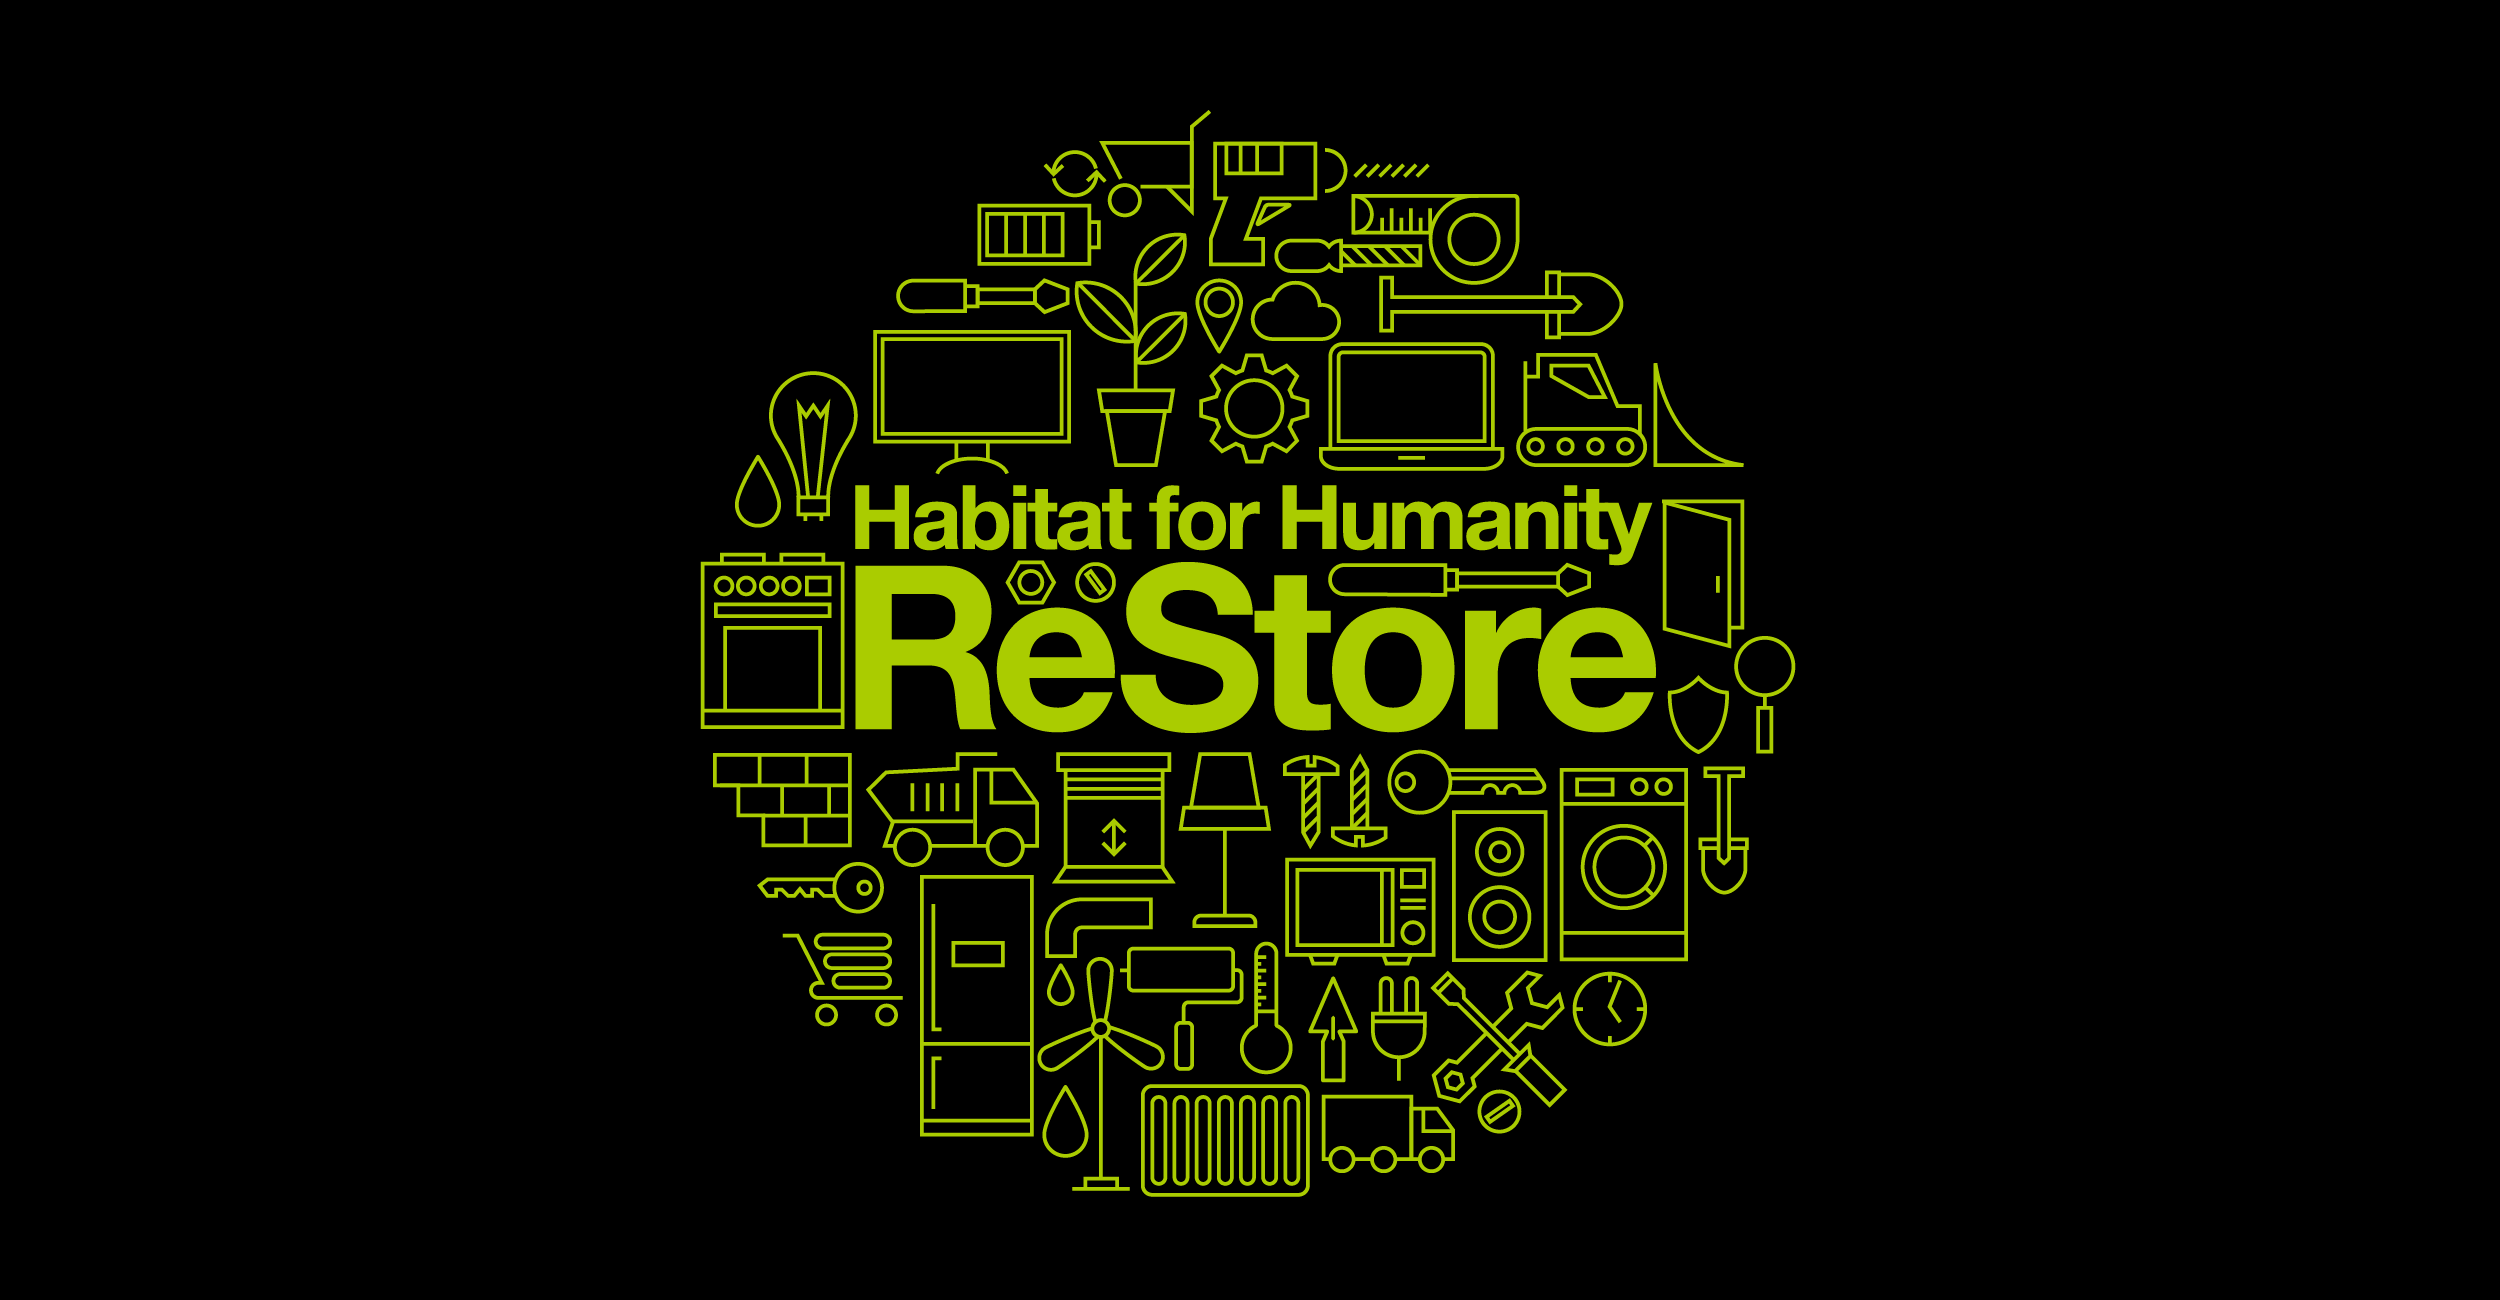 Words by Design - Habitat for Humanity global logo redesign